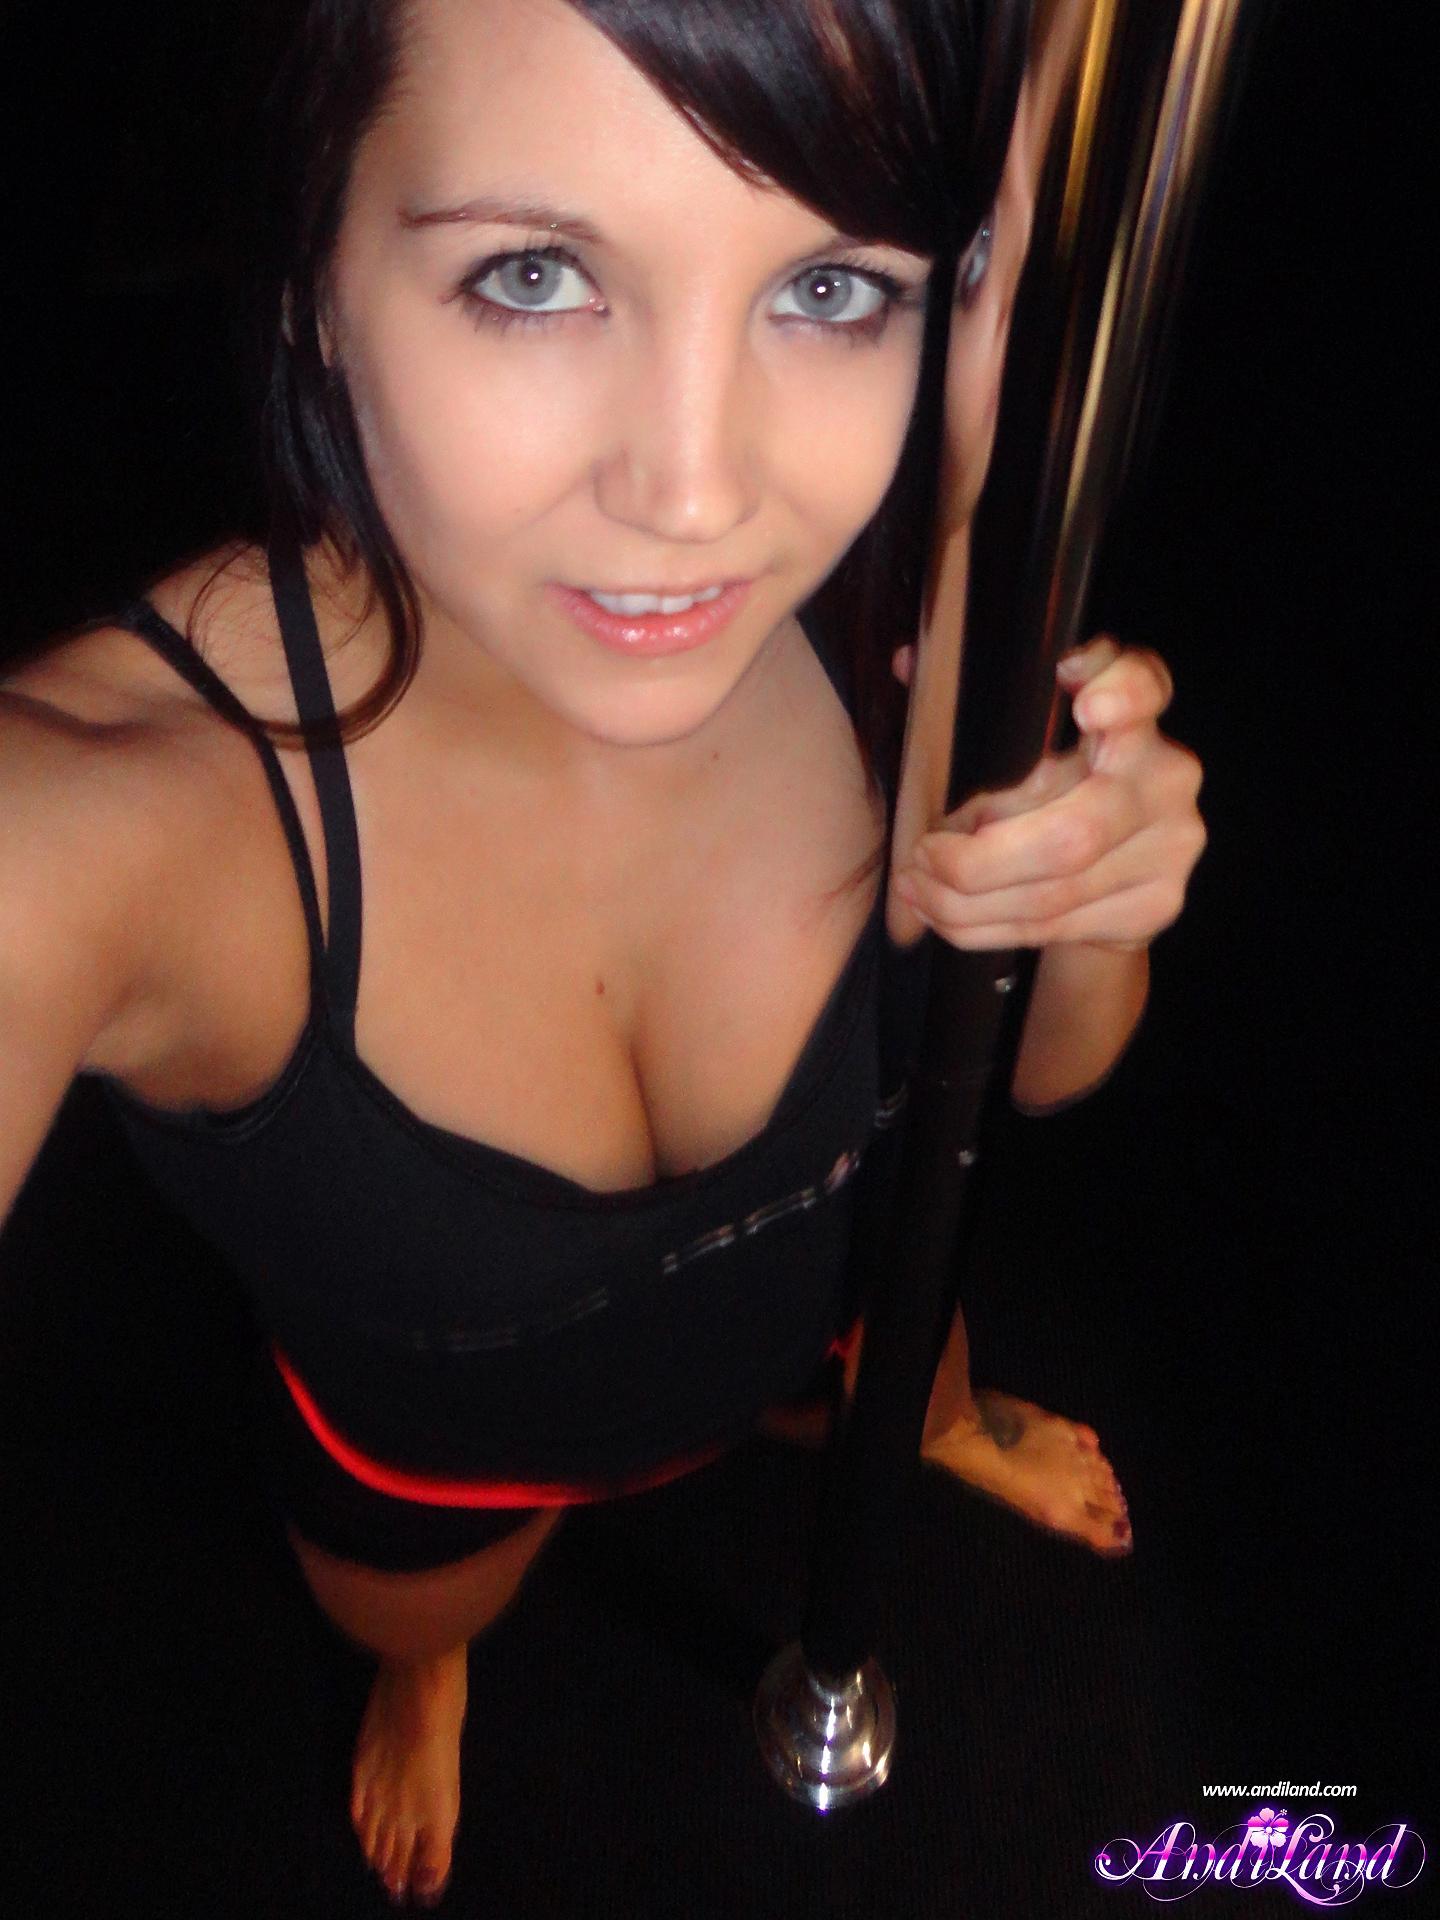 Pictures of hot teen Andi Land working the stripper pole #53141545